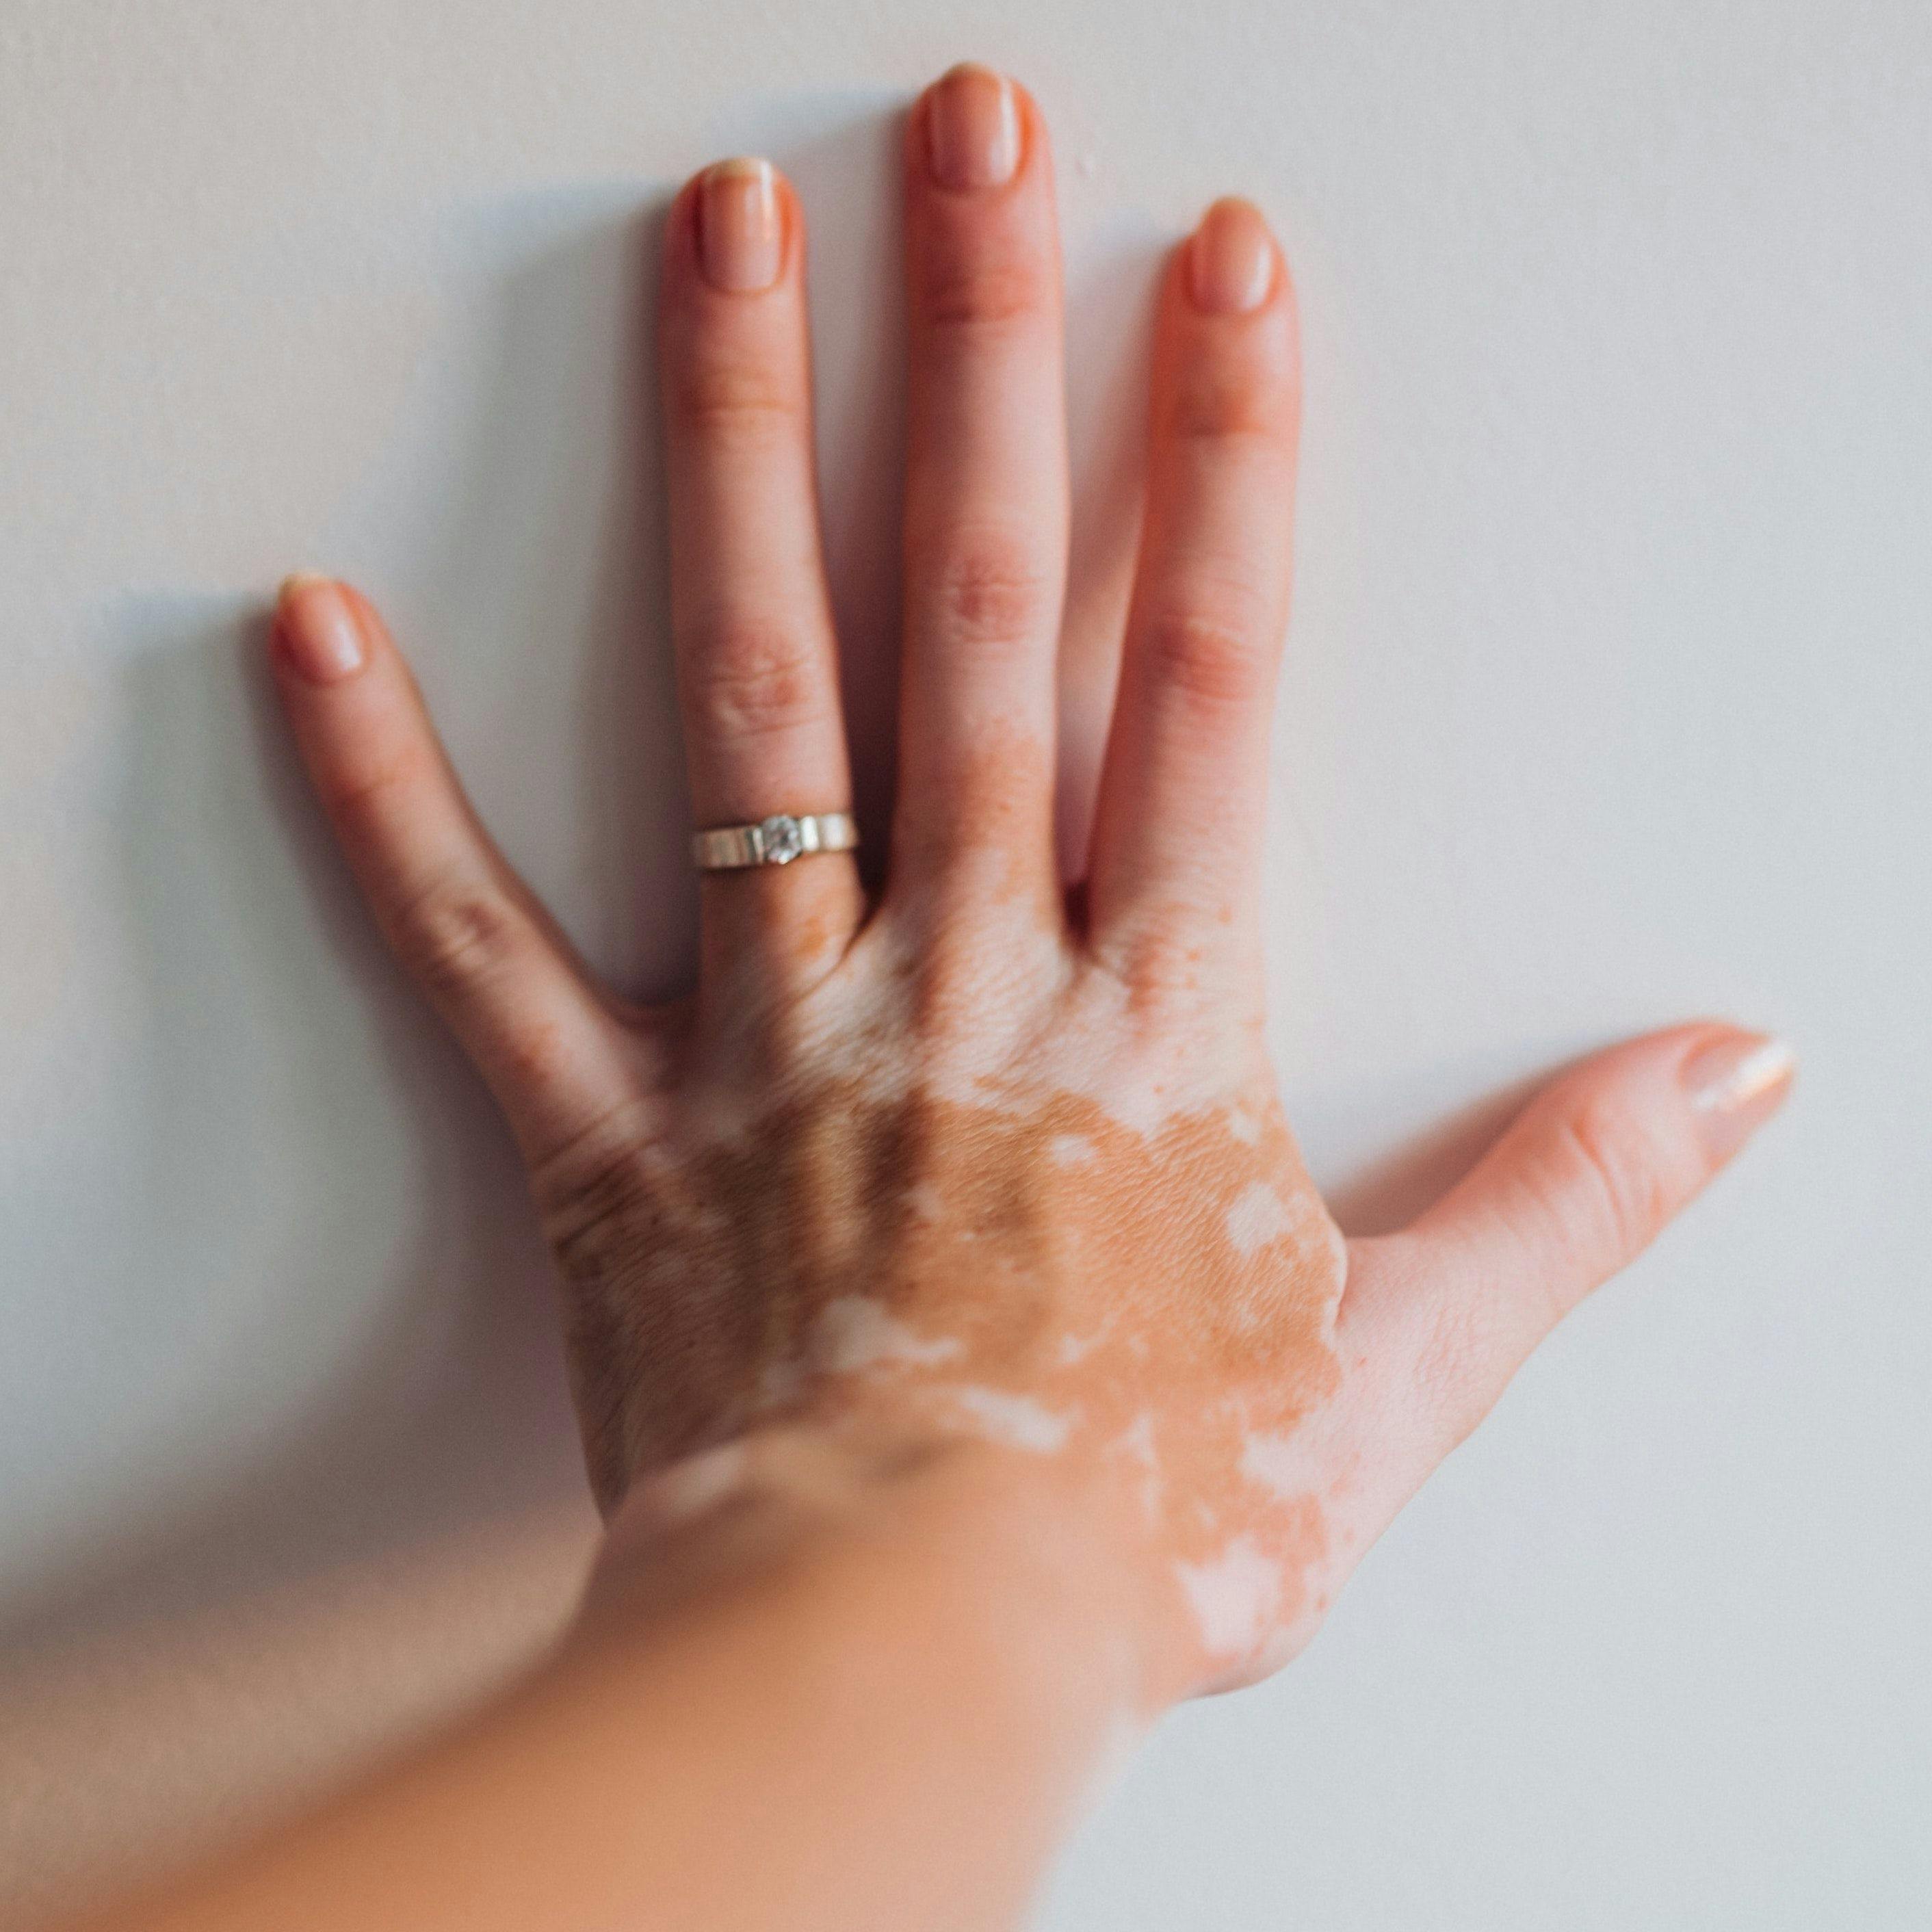 Oral Povorcitinib Significantly Improves Total, Facial Vitiligo in 24 Week Trial